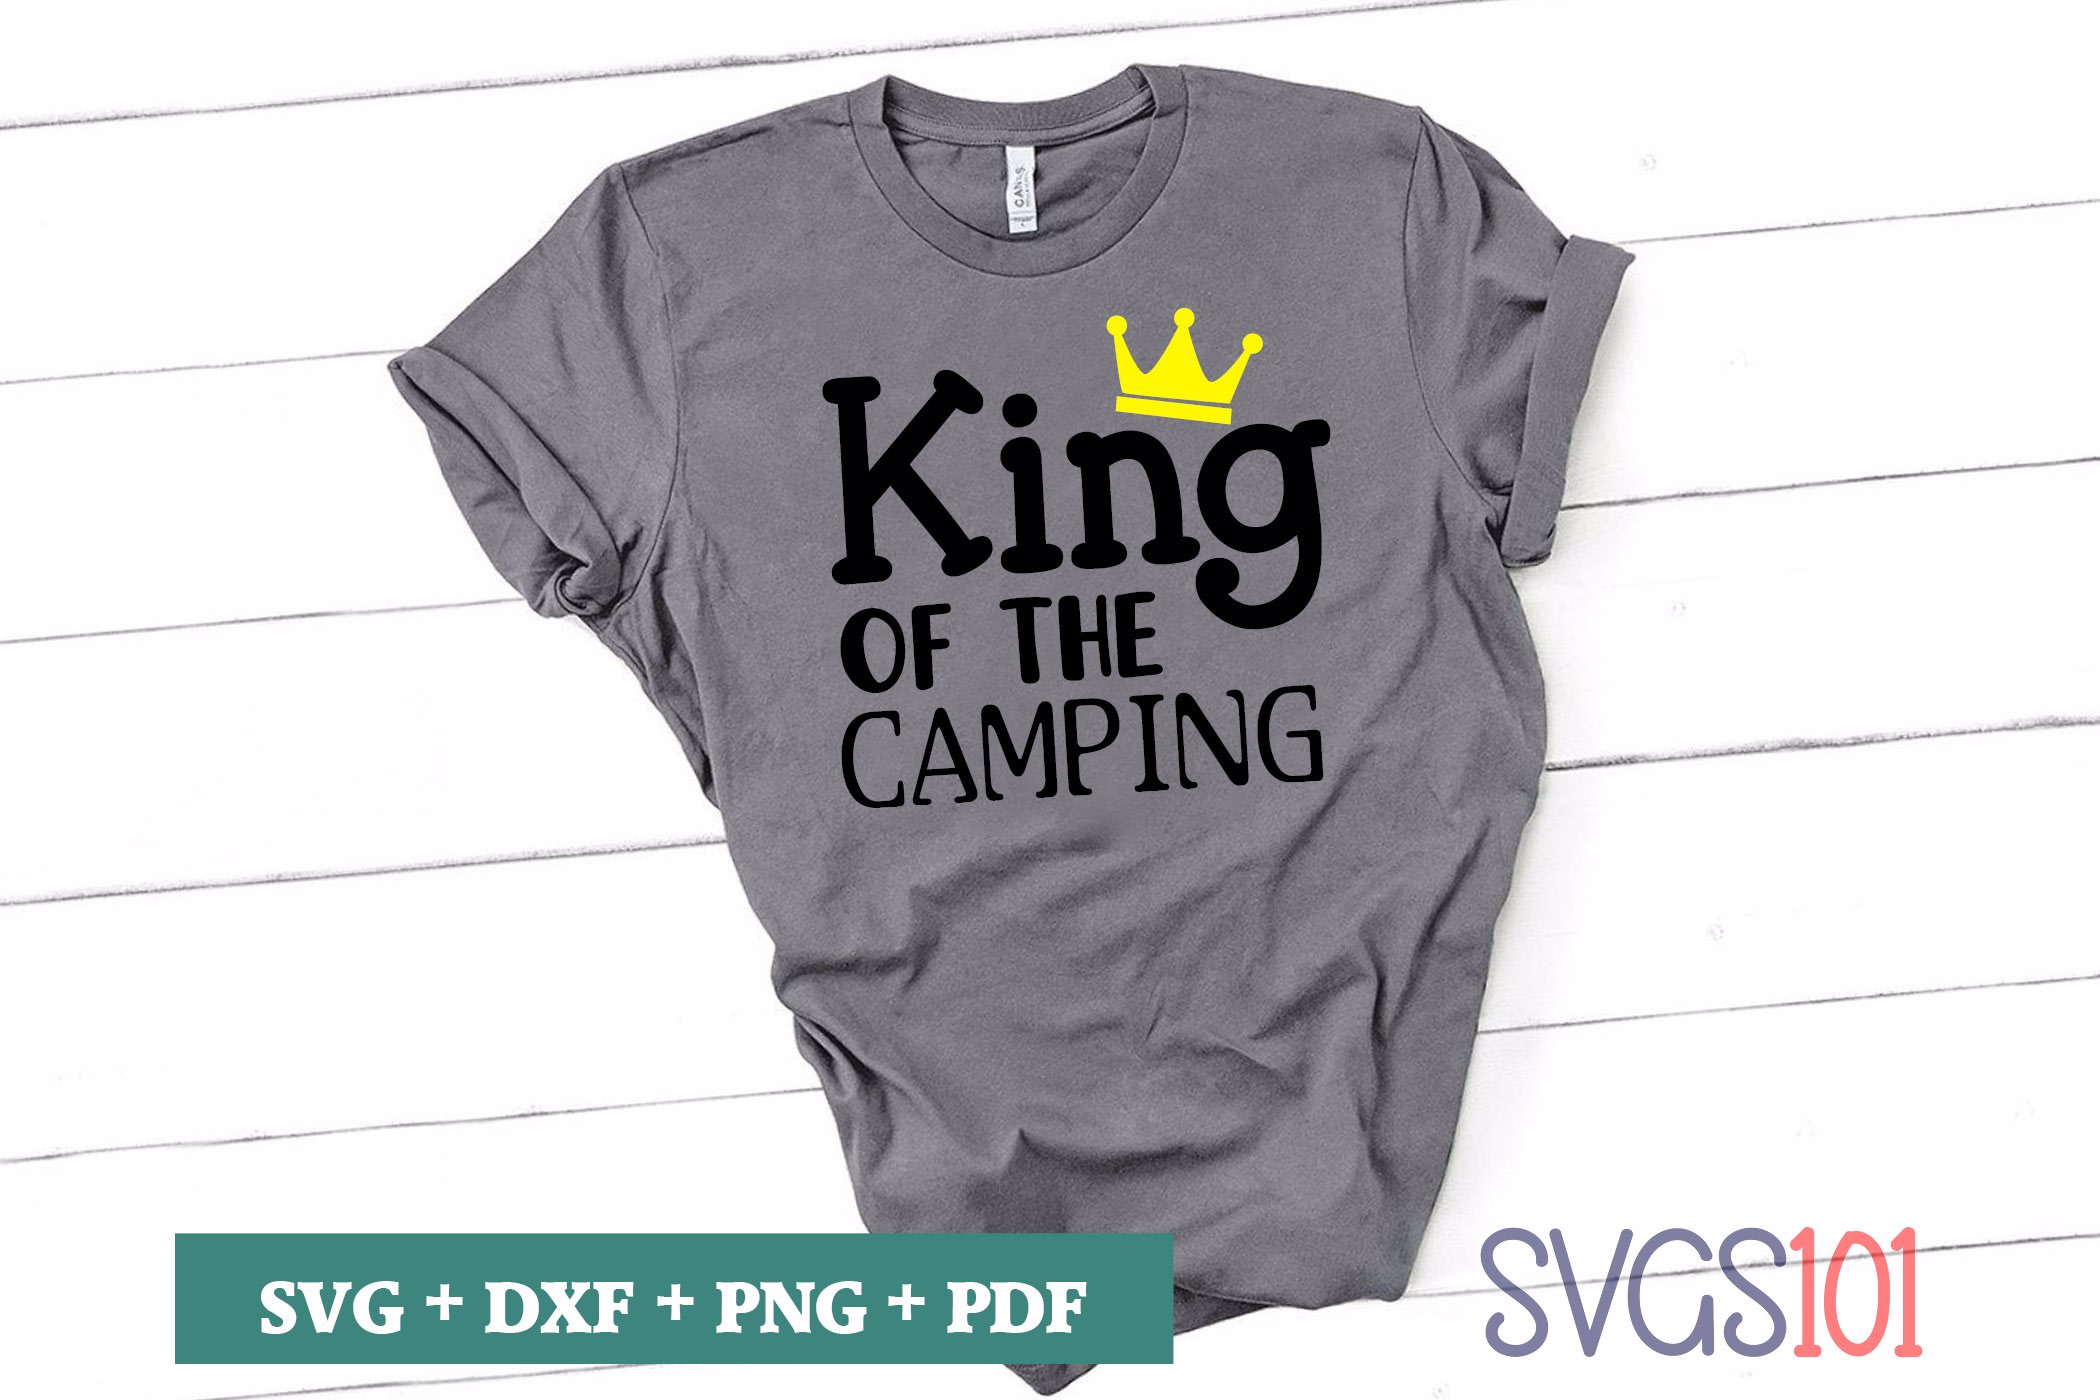 King of the Camping